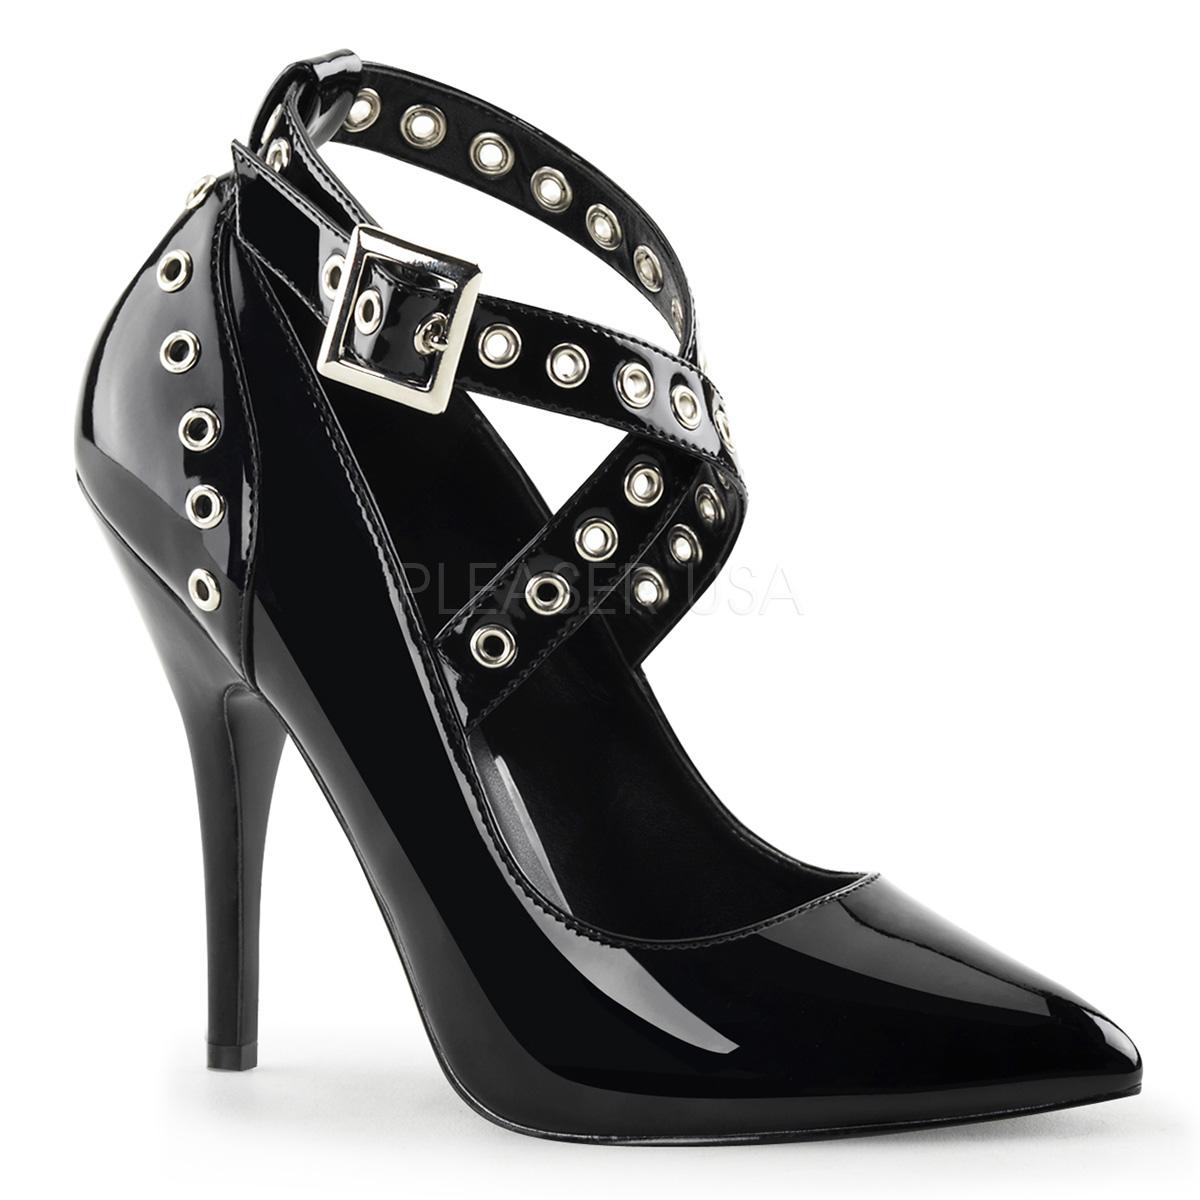 Black Patent Shoe with criss cross straps